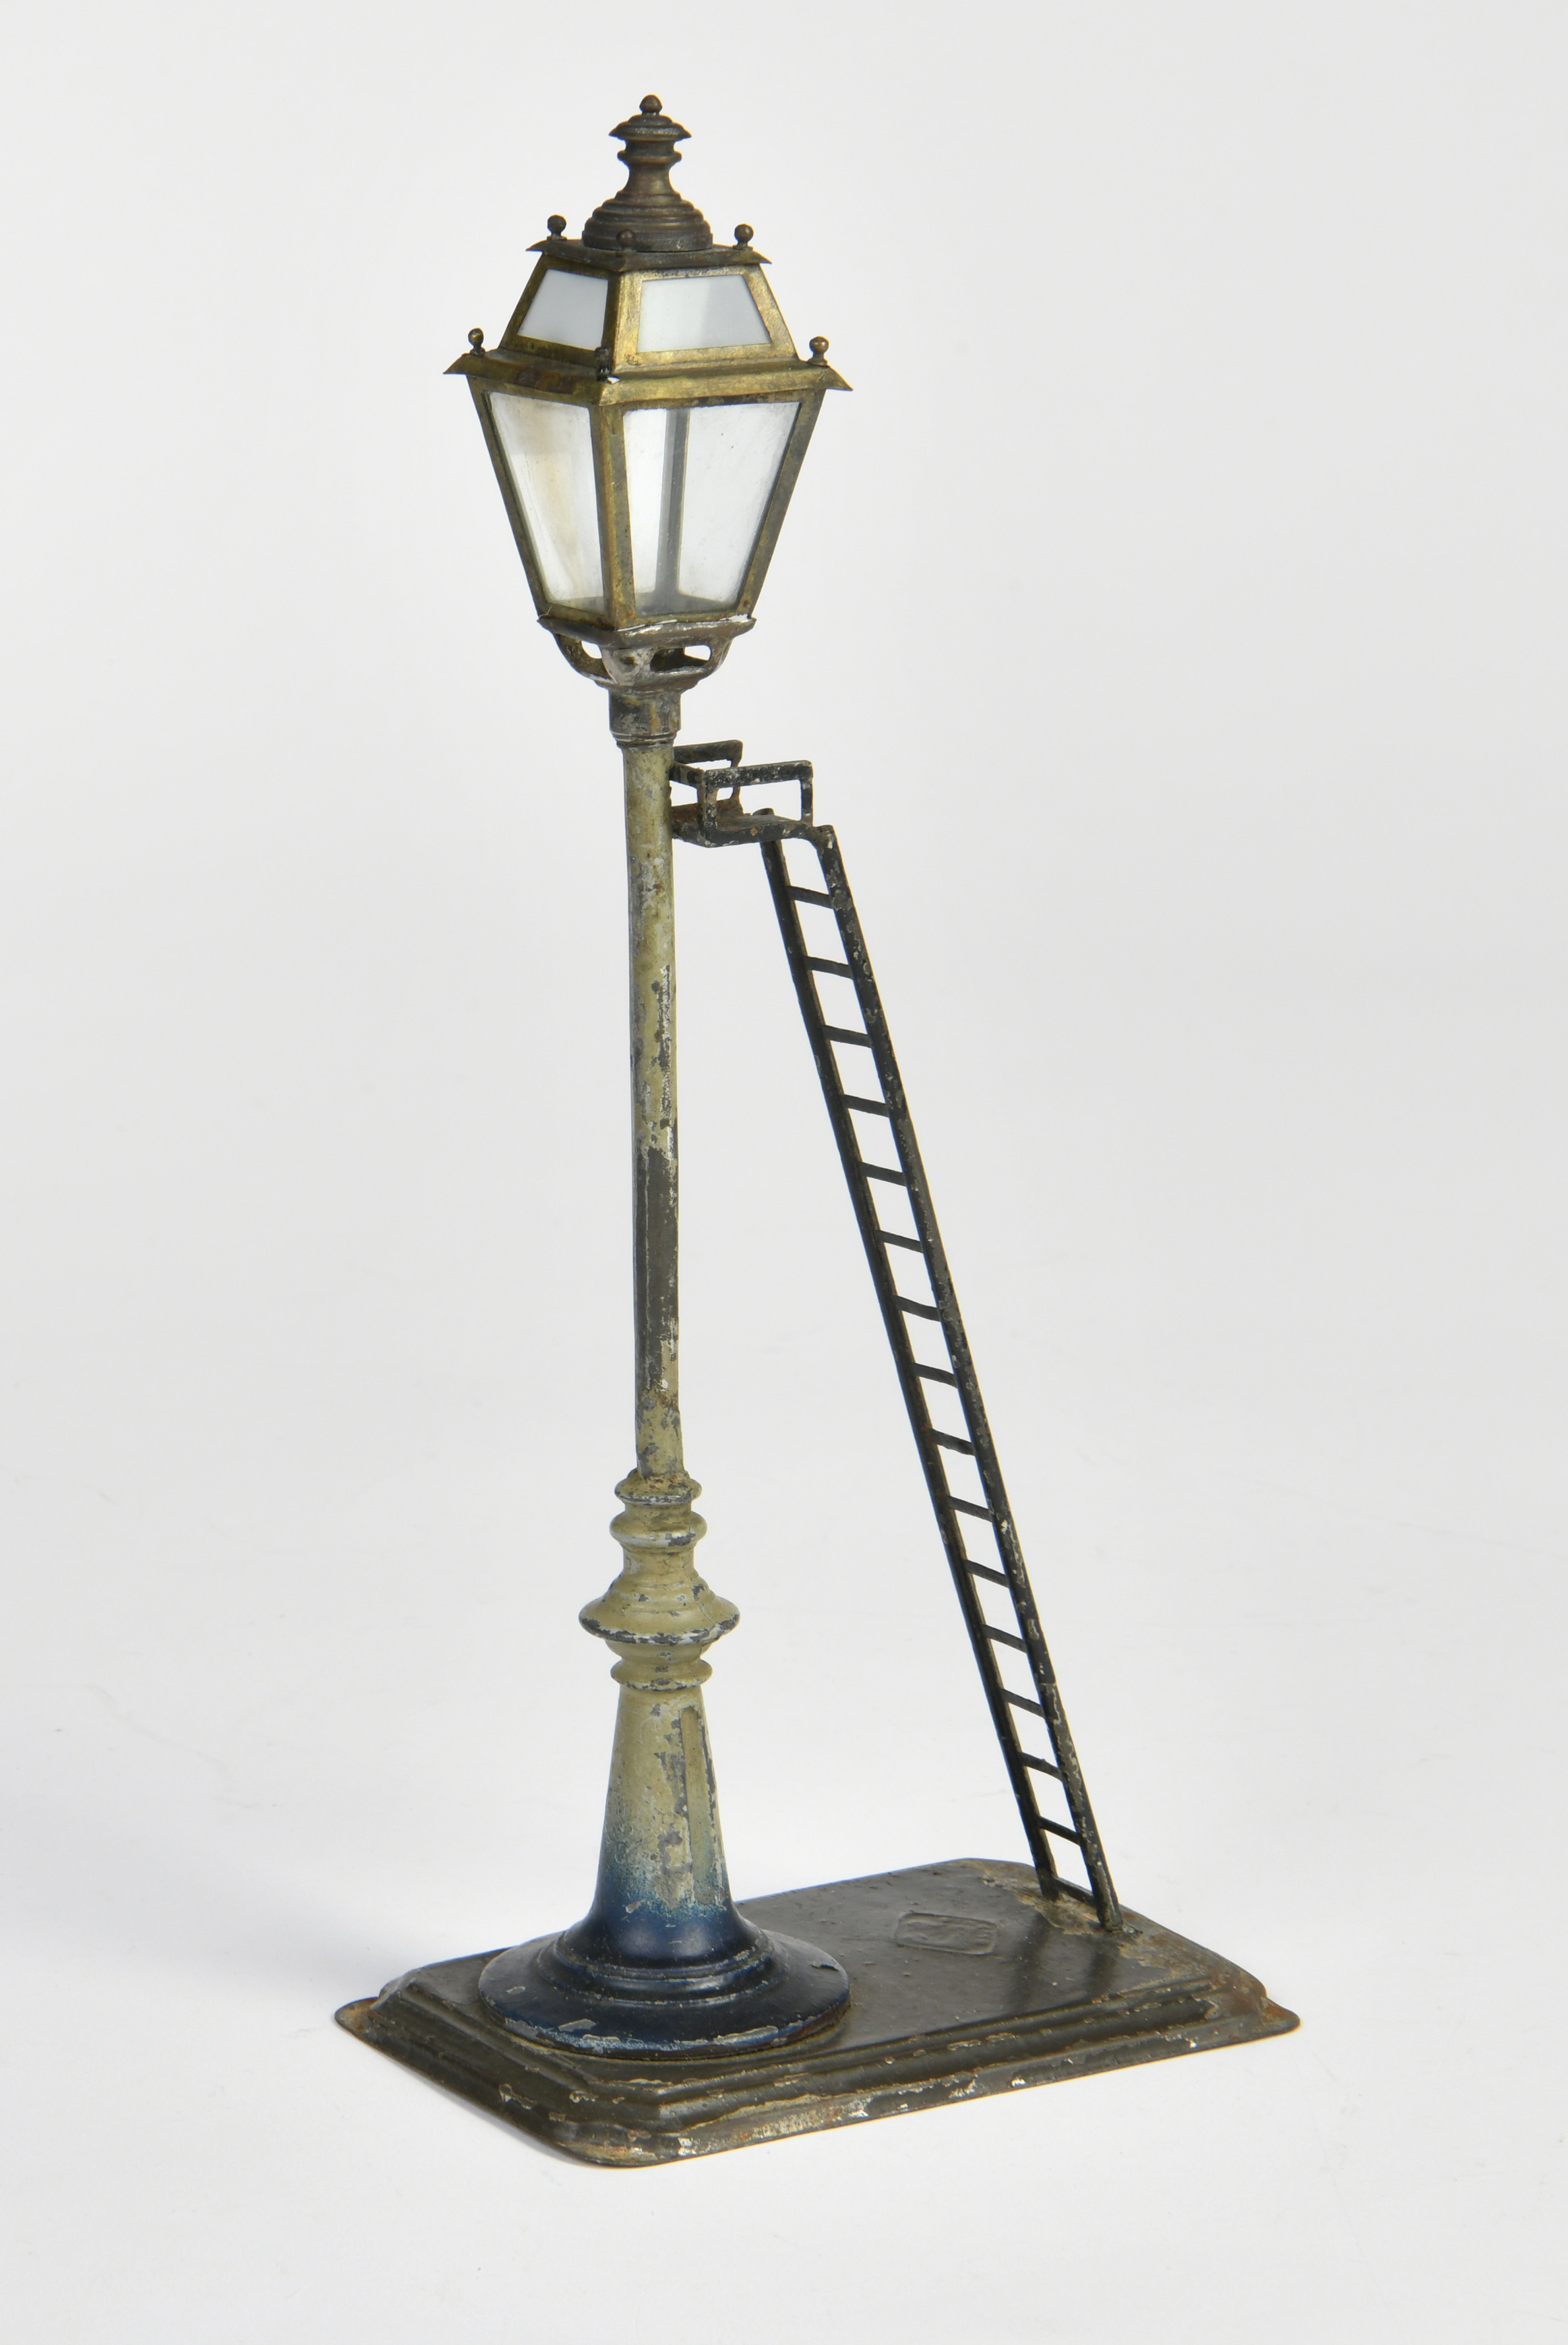 Bing, lamp with ladder, Germany pw, 24 cm, min. paint d., C 1-2 - Image 2 of 2